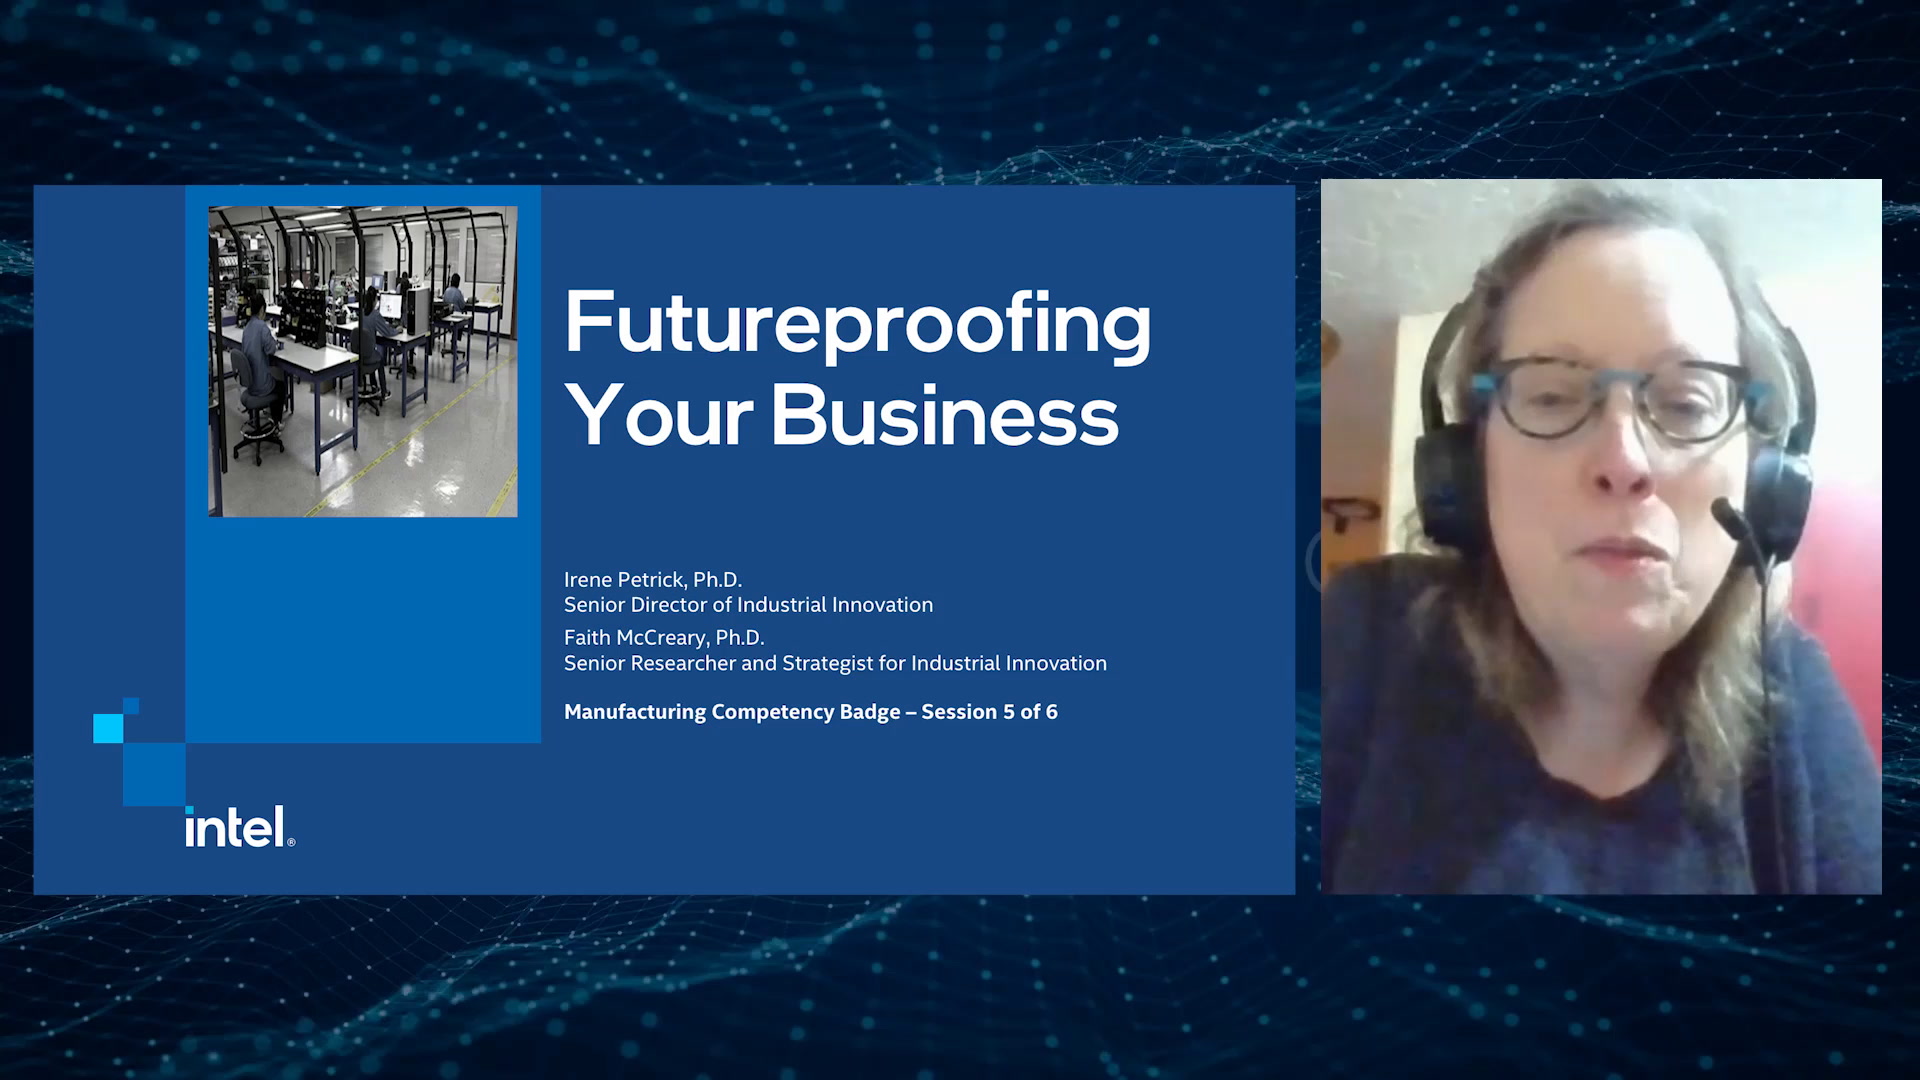 Chapter 1: Futureproofing Your Business